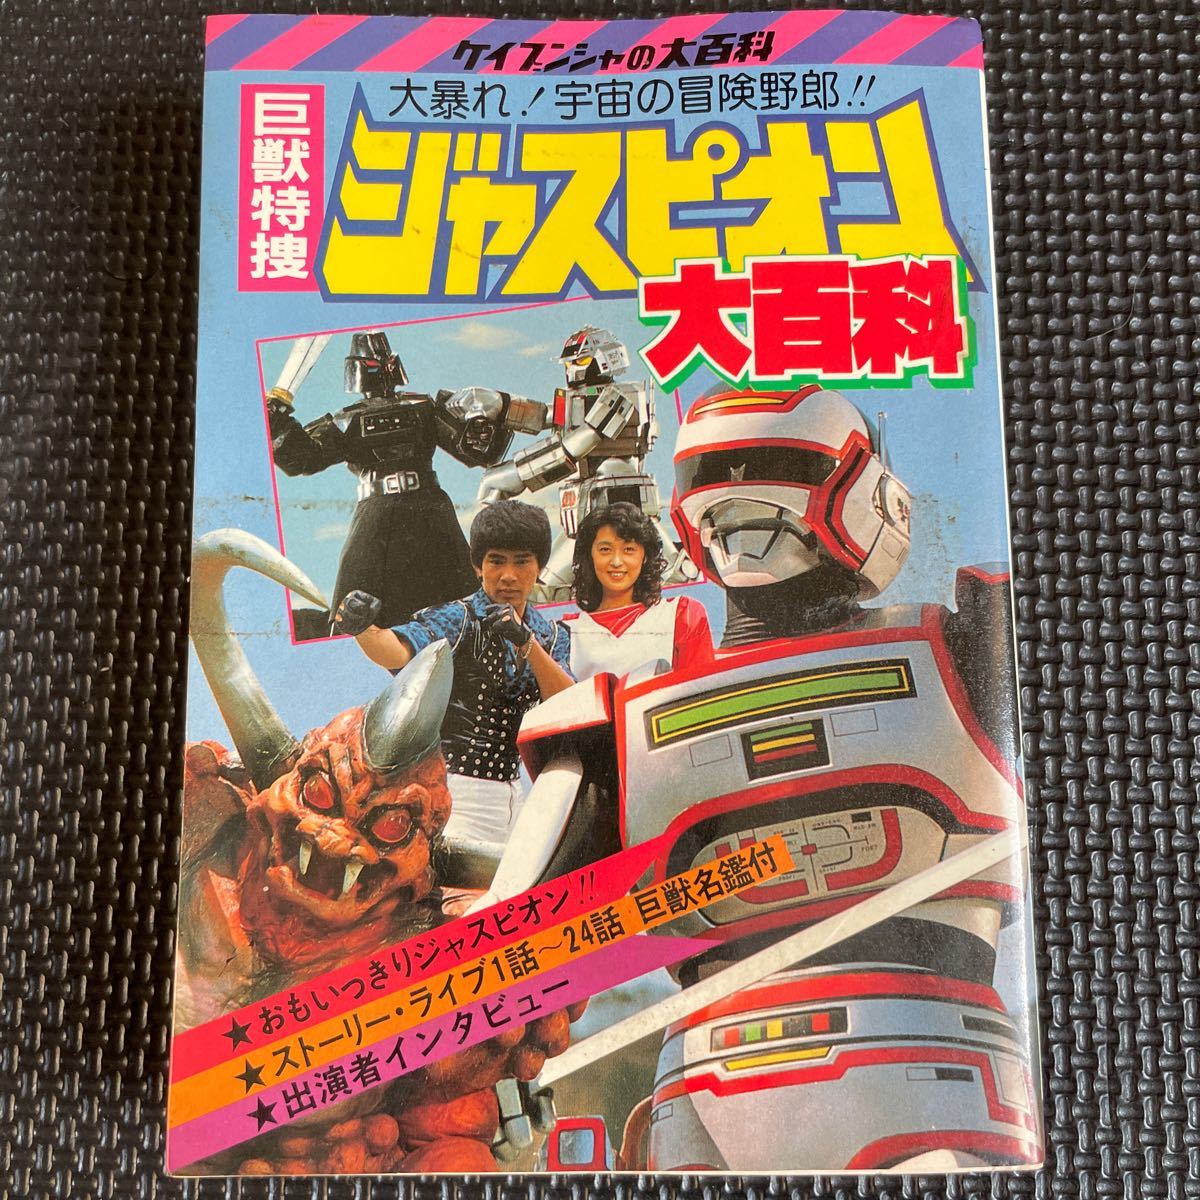  Kyouju Tokusou Jaspion large various subjects Cave n car special effects 230